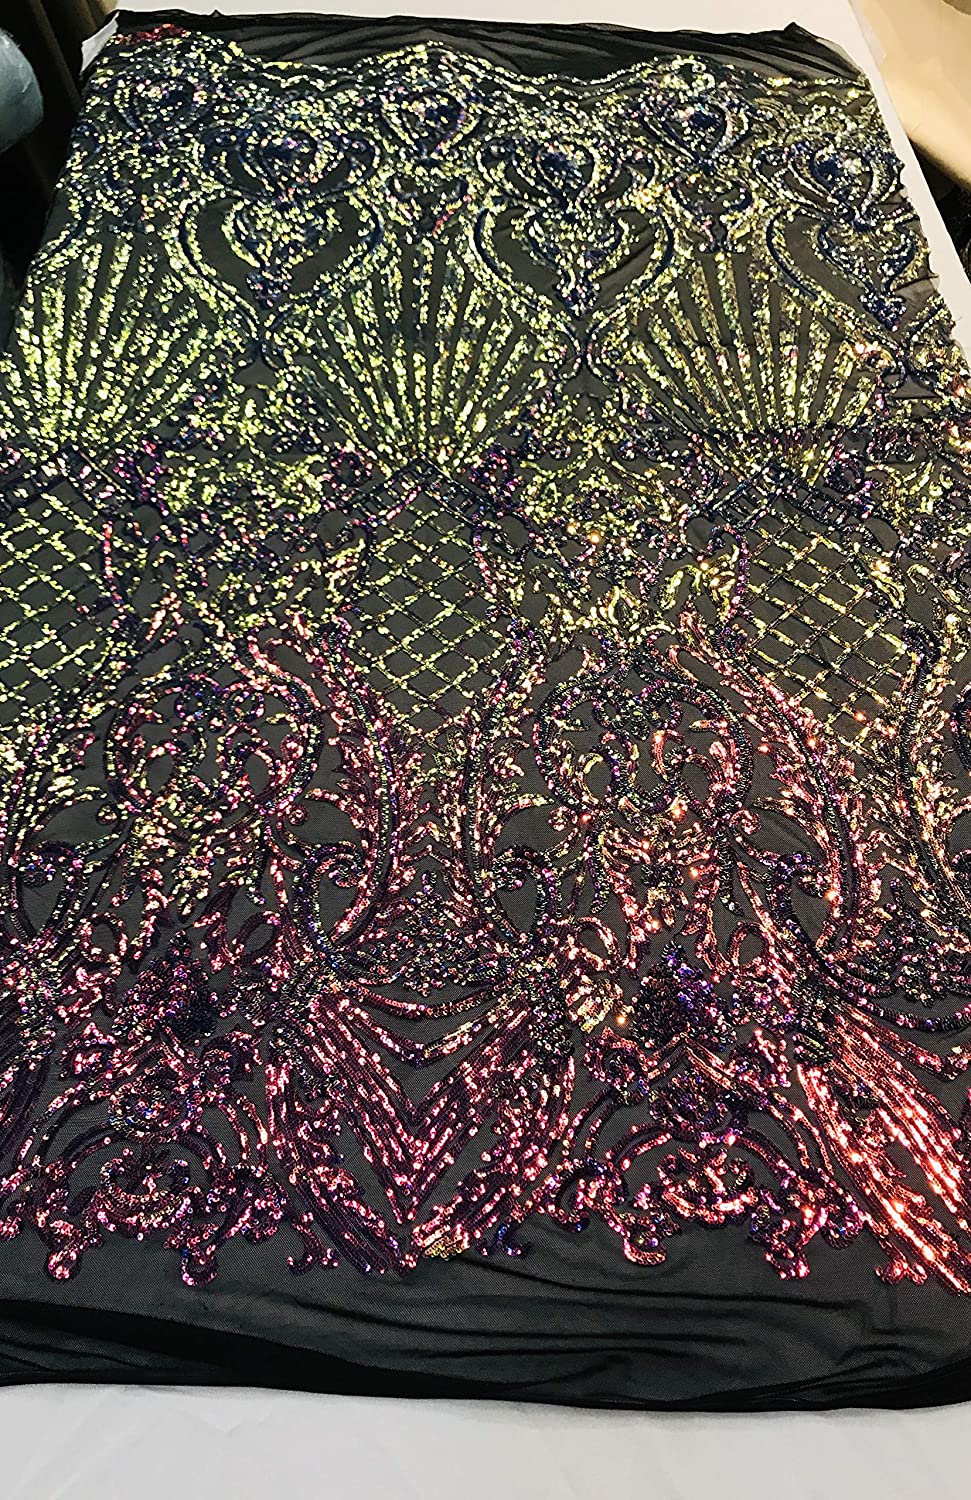 Damask Sequins Design on a 4 Way Stretch Mesh Fabric - for Night Gowns - Prom Dresses - (Rainbow Iridescent on Black, 1 Yard)